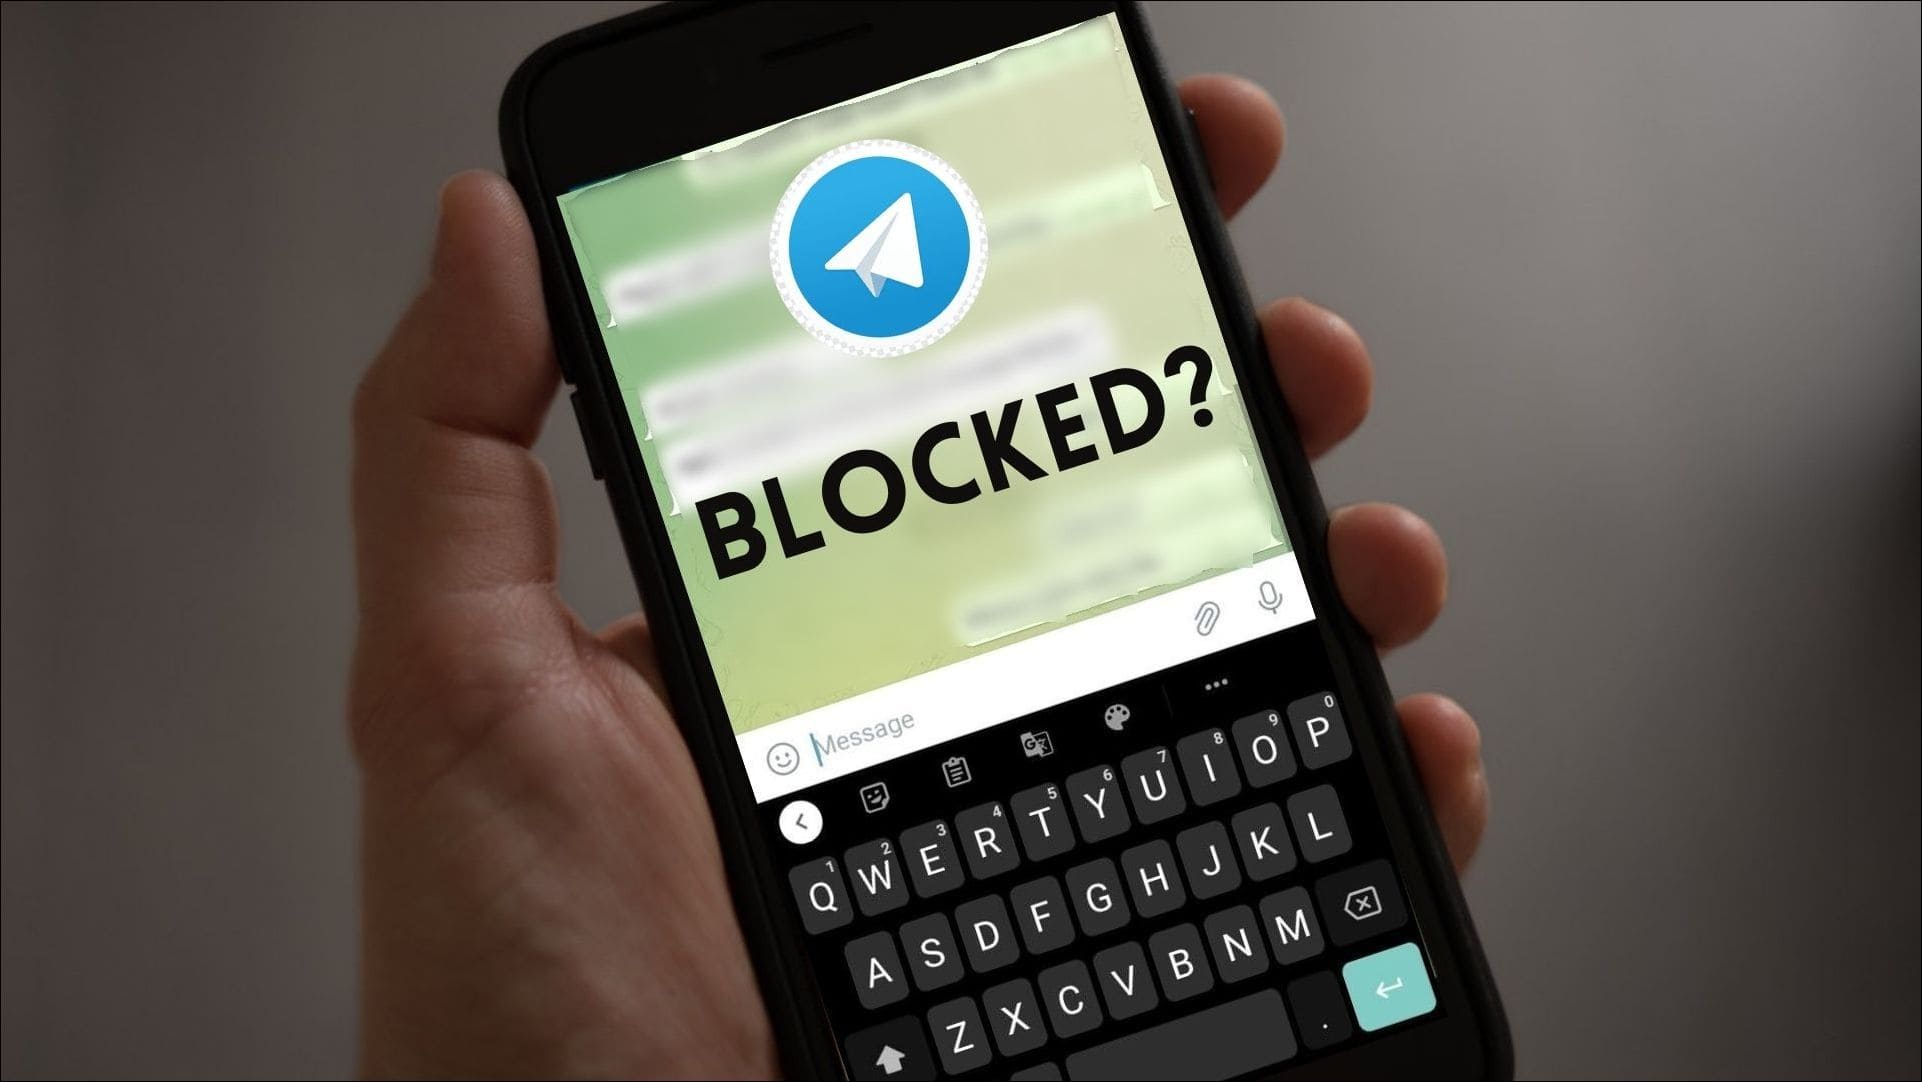 4 signs to check if someone has blocked you on Telegram – tools to use